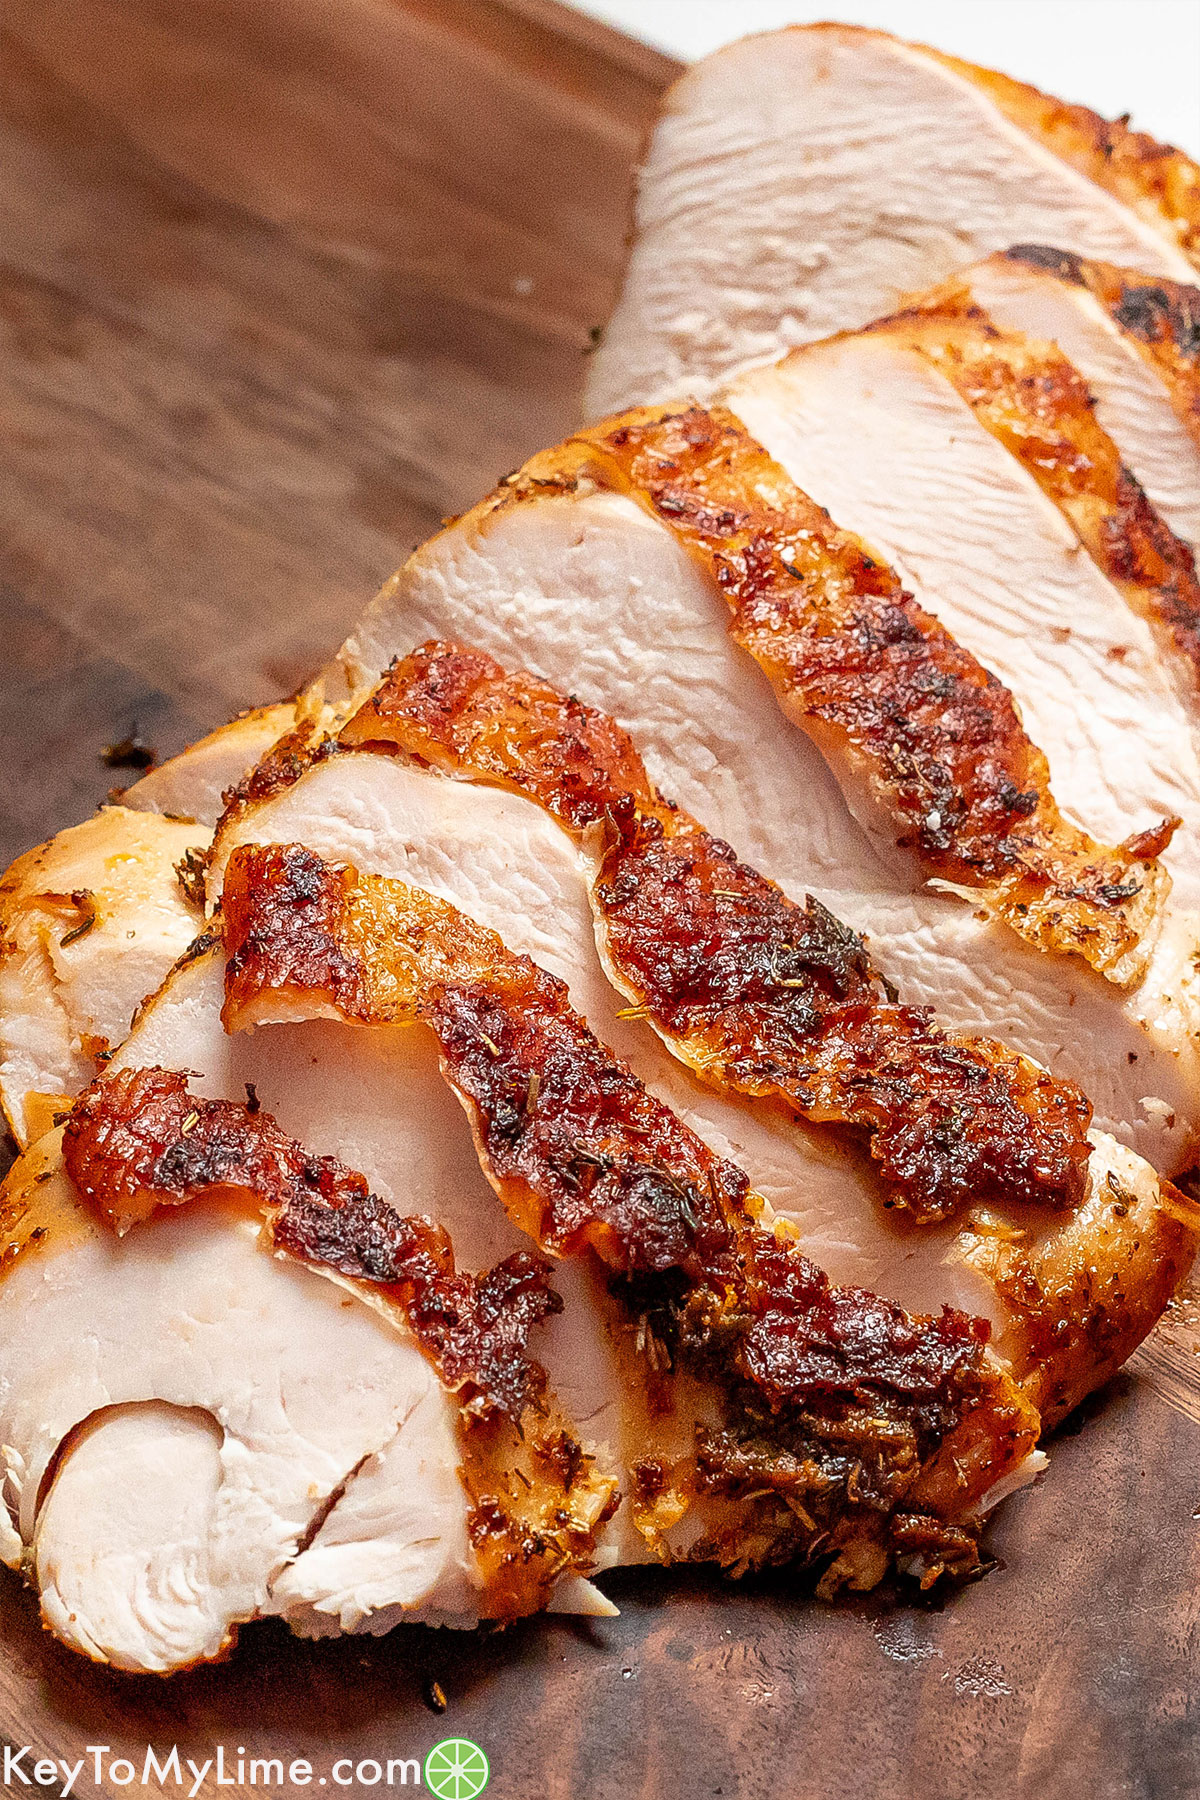 A side image of a turkey breast cut up into thick slices with golden crispy skin.